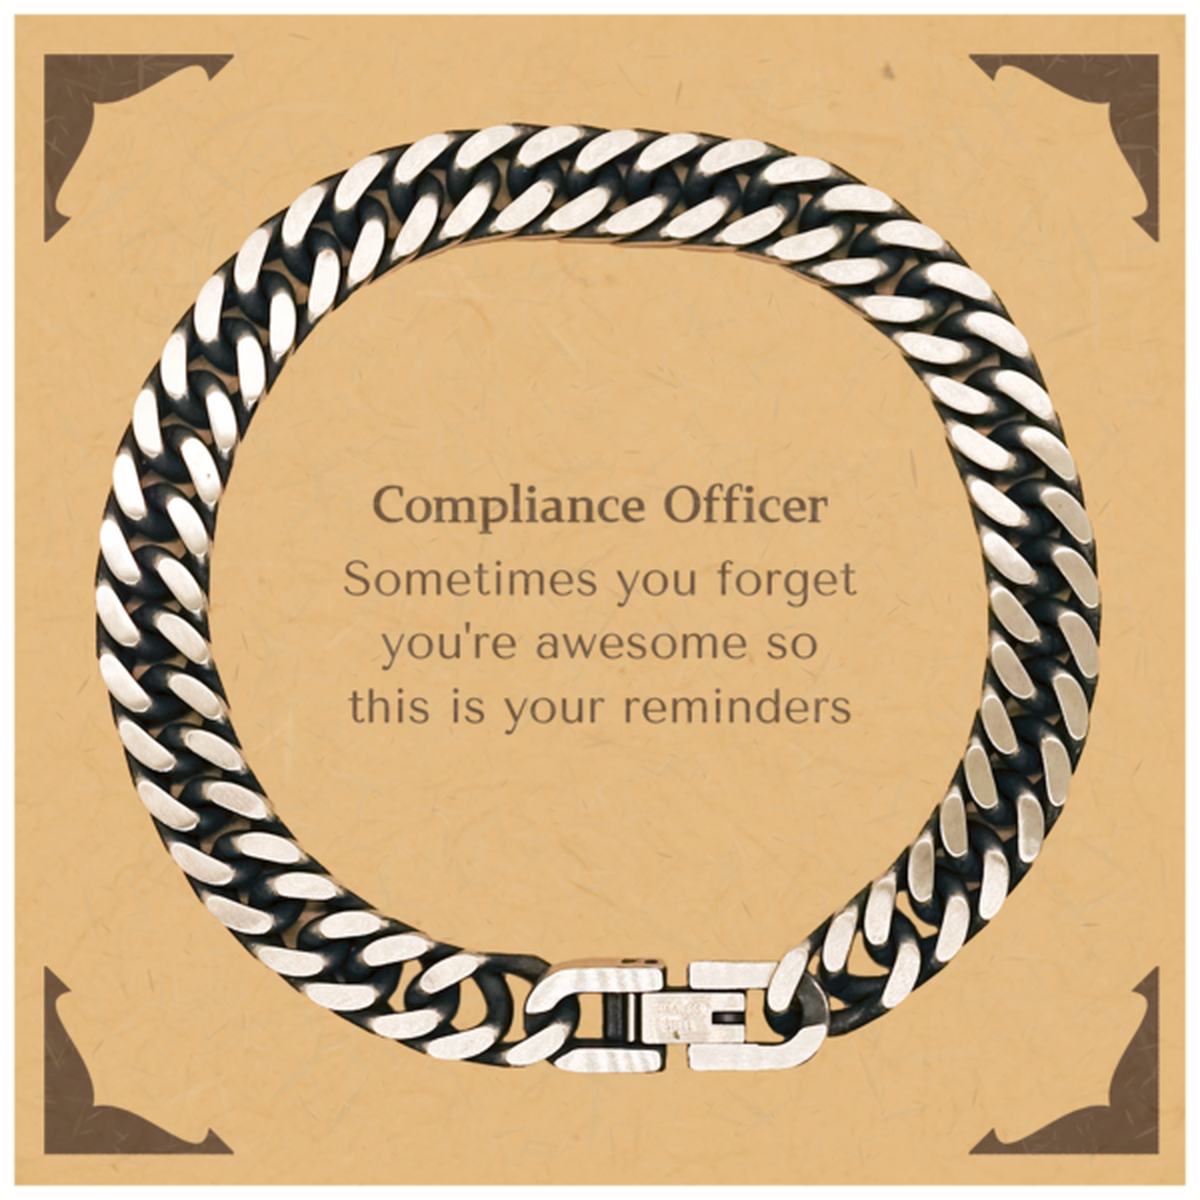 Sentimental Compliance Officer Cuban Link Chain Bracelet, Compliance Officer Sometimes you forget you're awesome so this is your reminders, Graduation Christmas Birthday Gifts for Compliance Officer, Men, Women, Coworkers